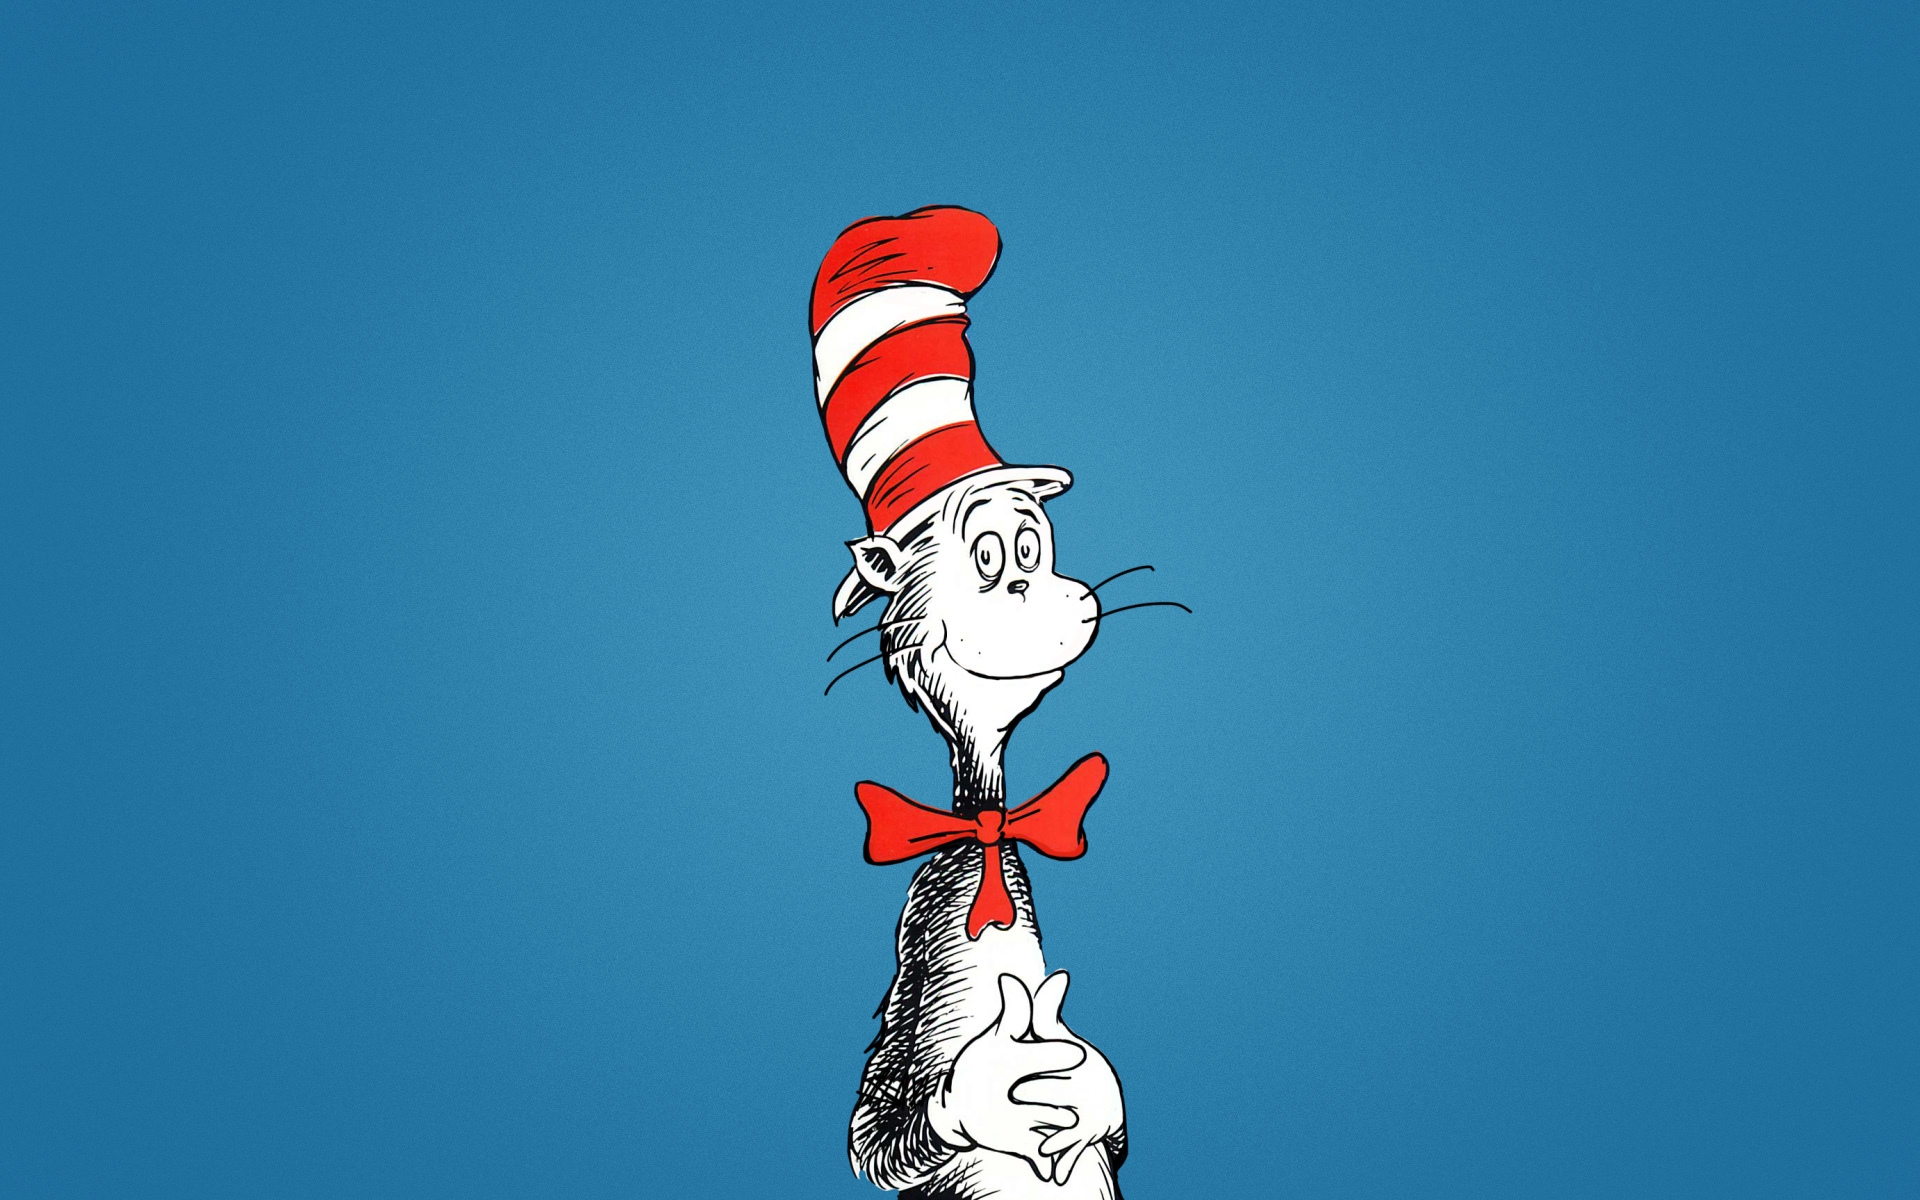 1 Dr. Seuss: The Cat In The Hat HD Wallpapers | Backgrounds - Wallpaper Abyss